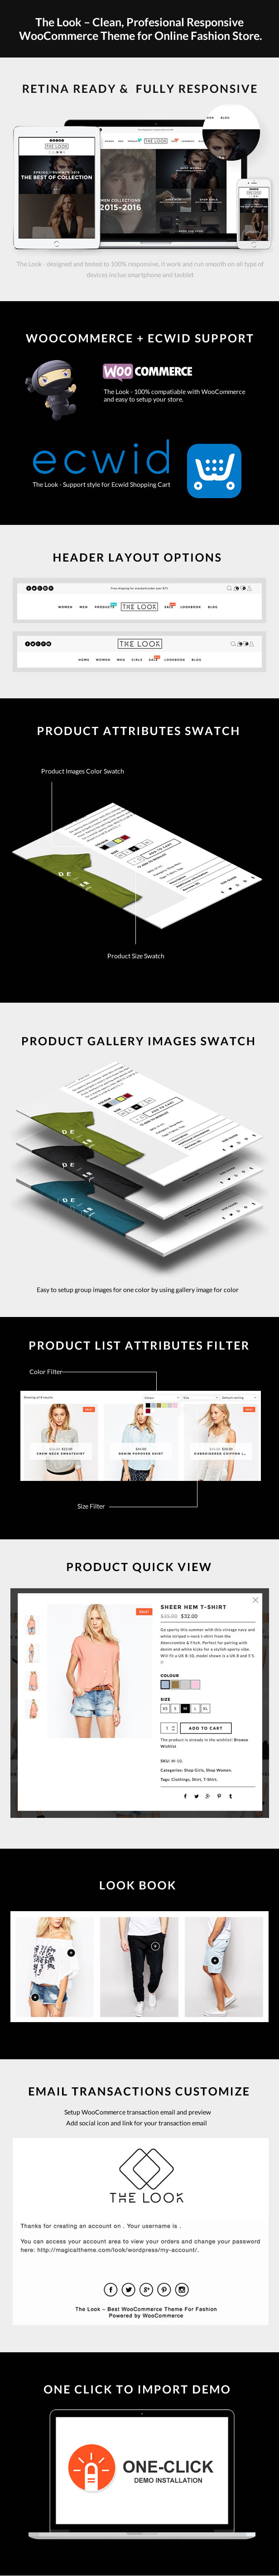 The Look - Clean, Responsive WooCommerce Theme - 1